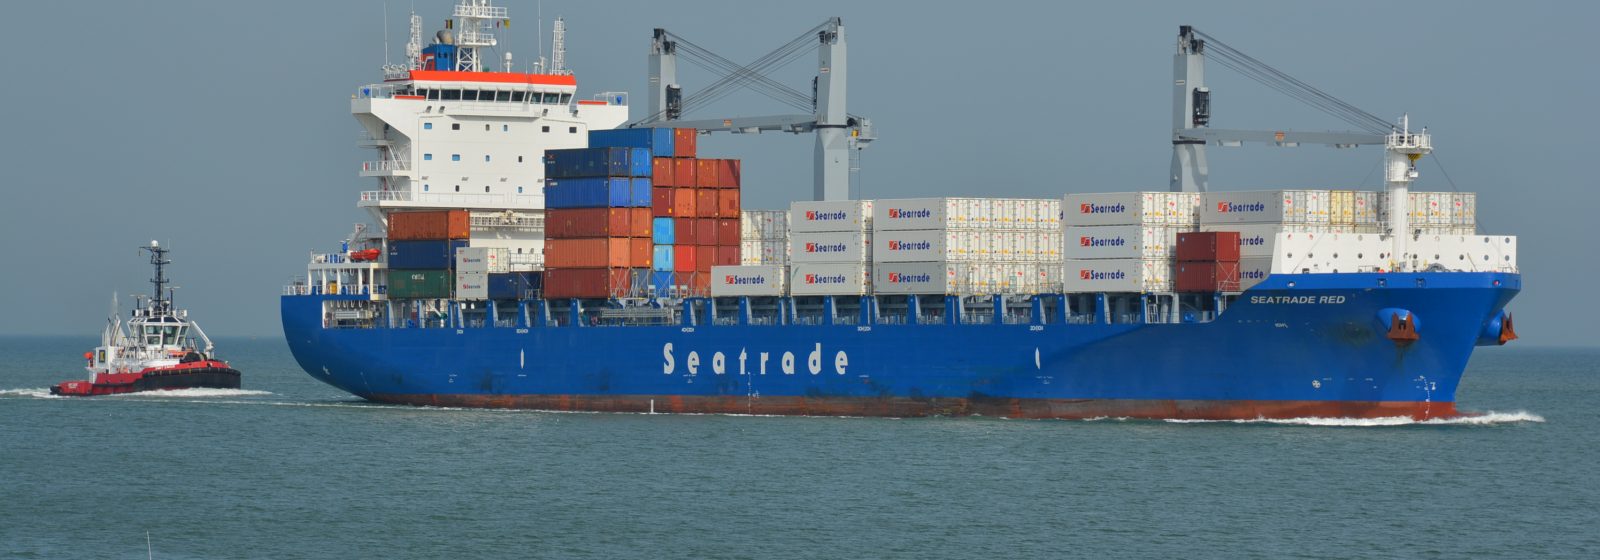 seatrade red containerschip